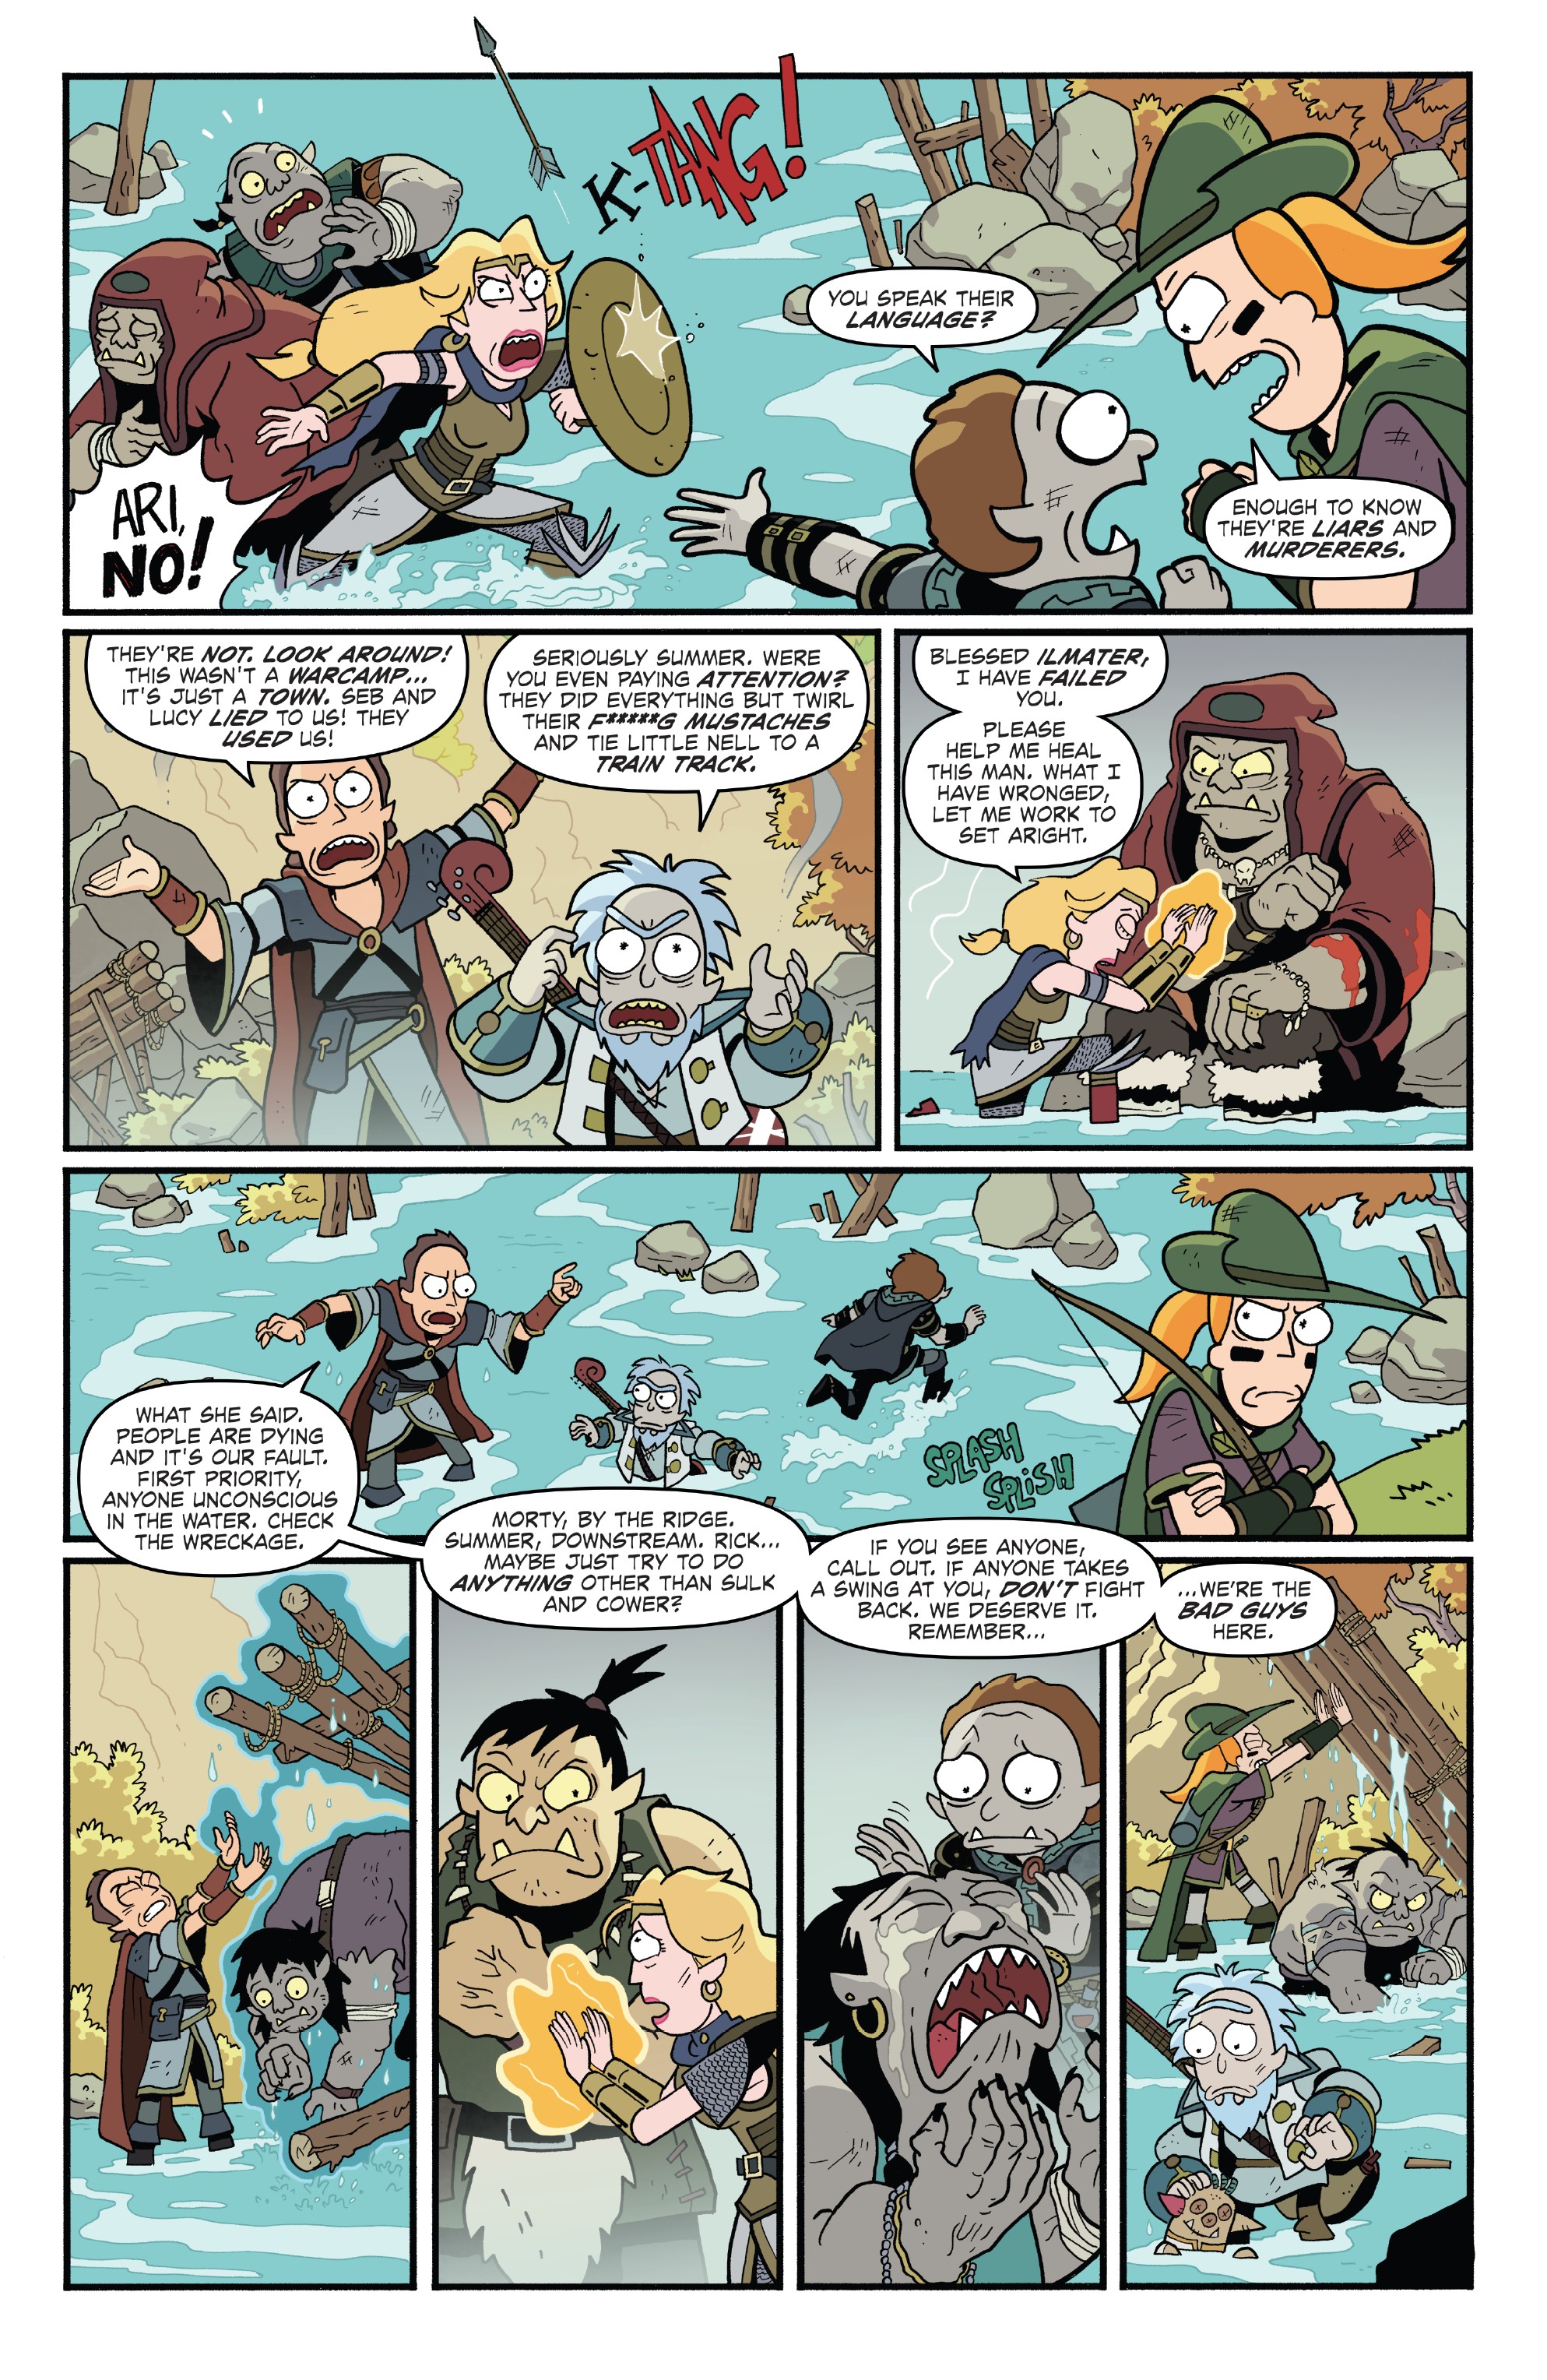 Rick and Morty vs. Dungeons & Dragons (2018-): Chapter 4 - Page 4